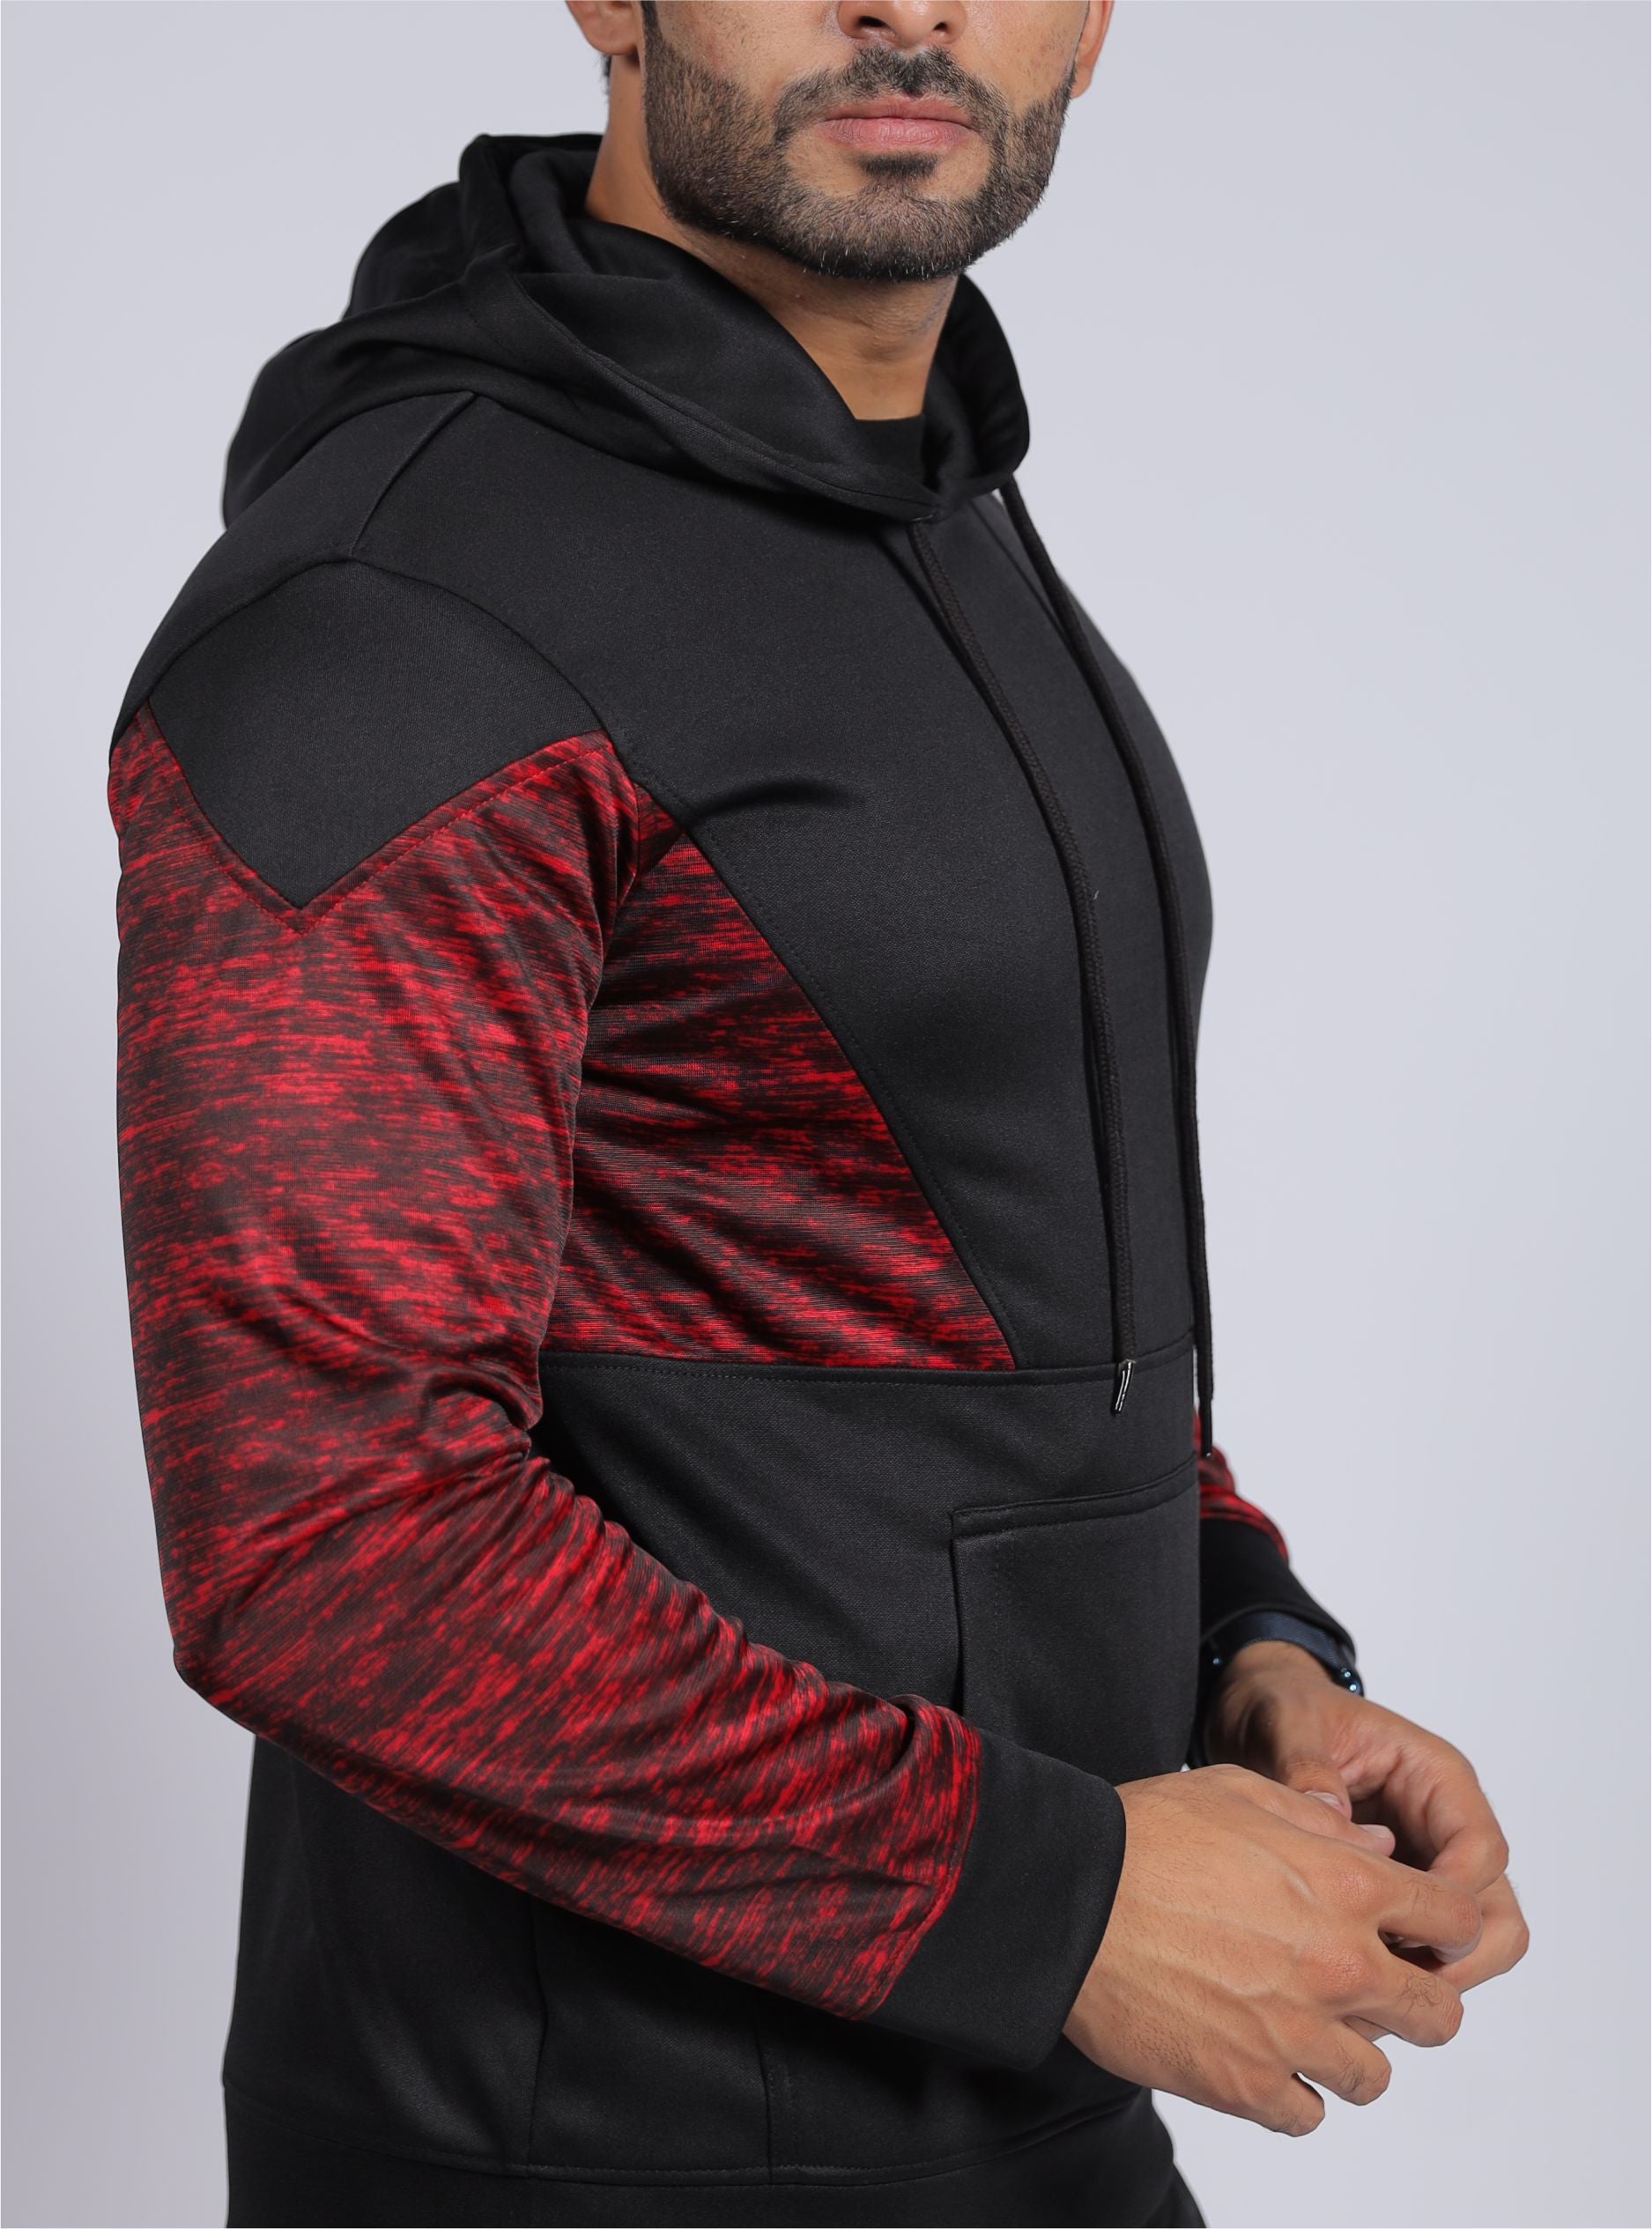 Tracksuits in pakistan, Tracksuits for Mens, 